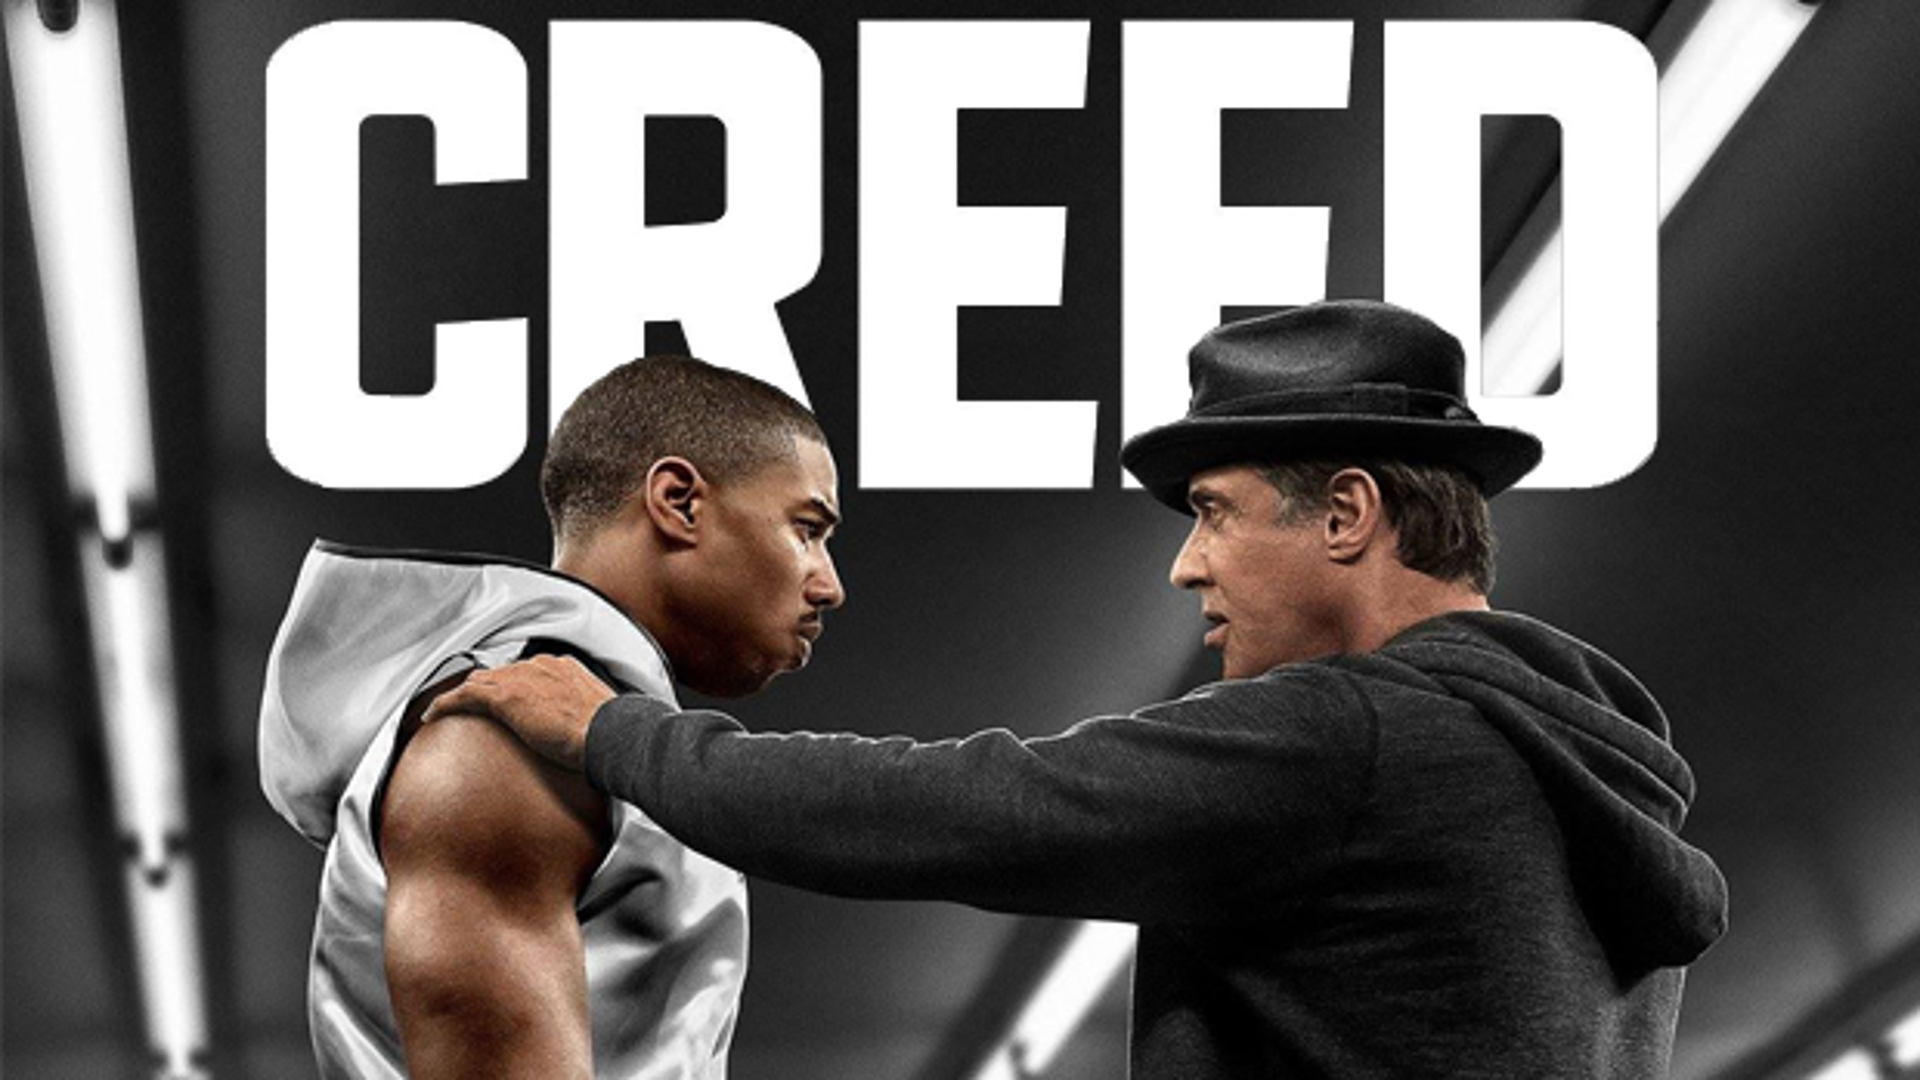 High Resolution Wallpaper | Creed 1920x1080 px